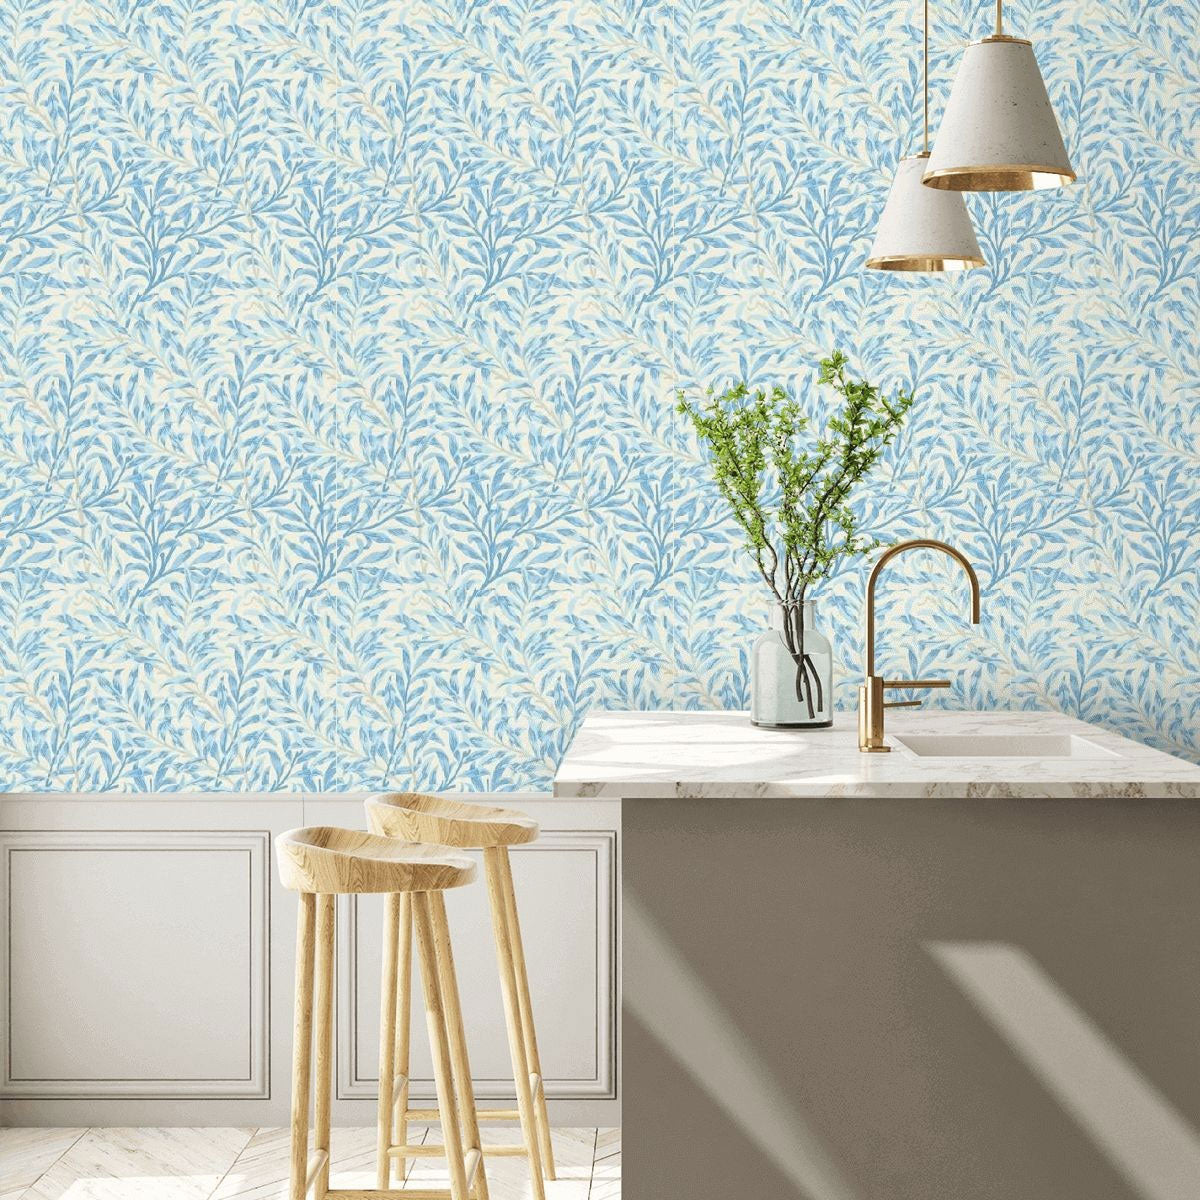 Morris & Co 'Willow Boughs - Blue' Wallpaper - Courthouse Interiors